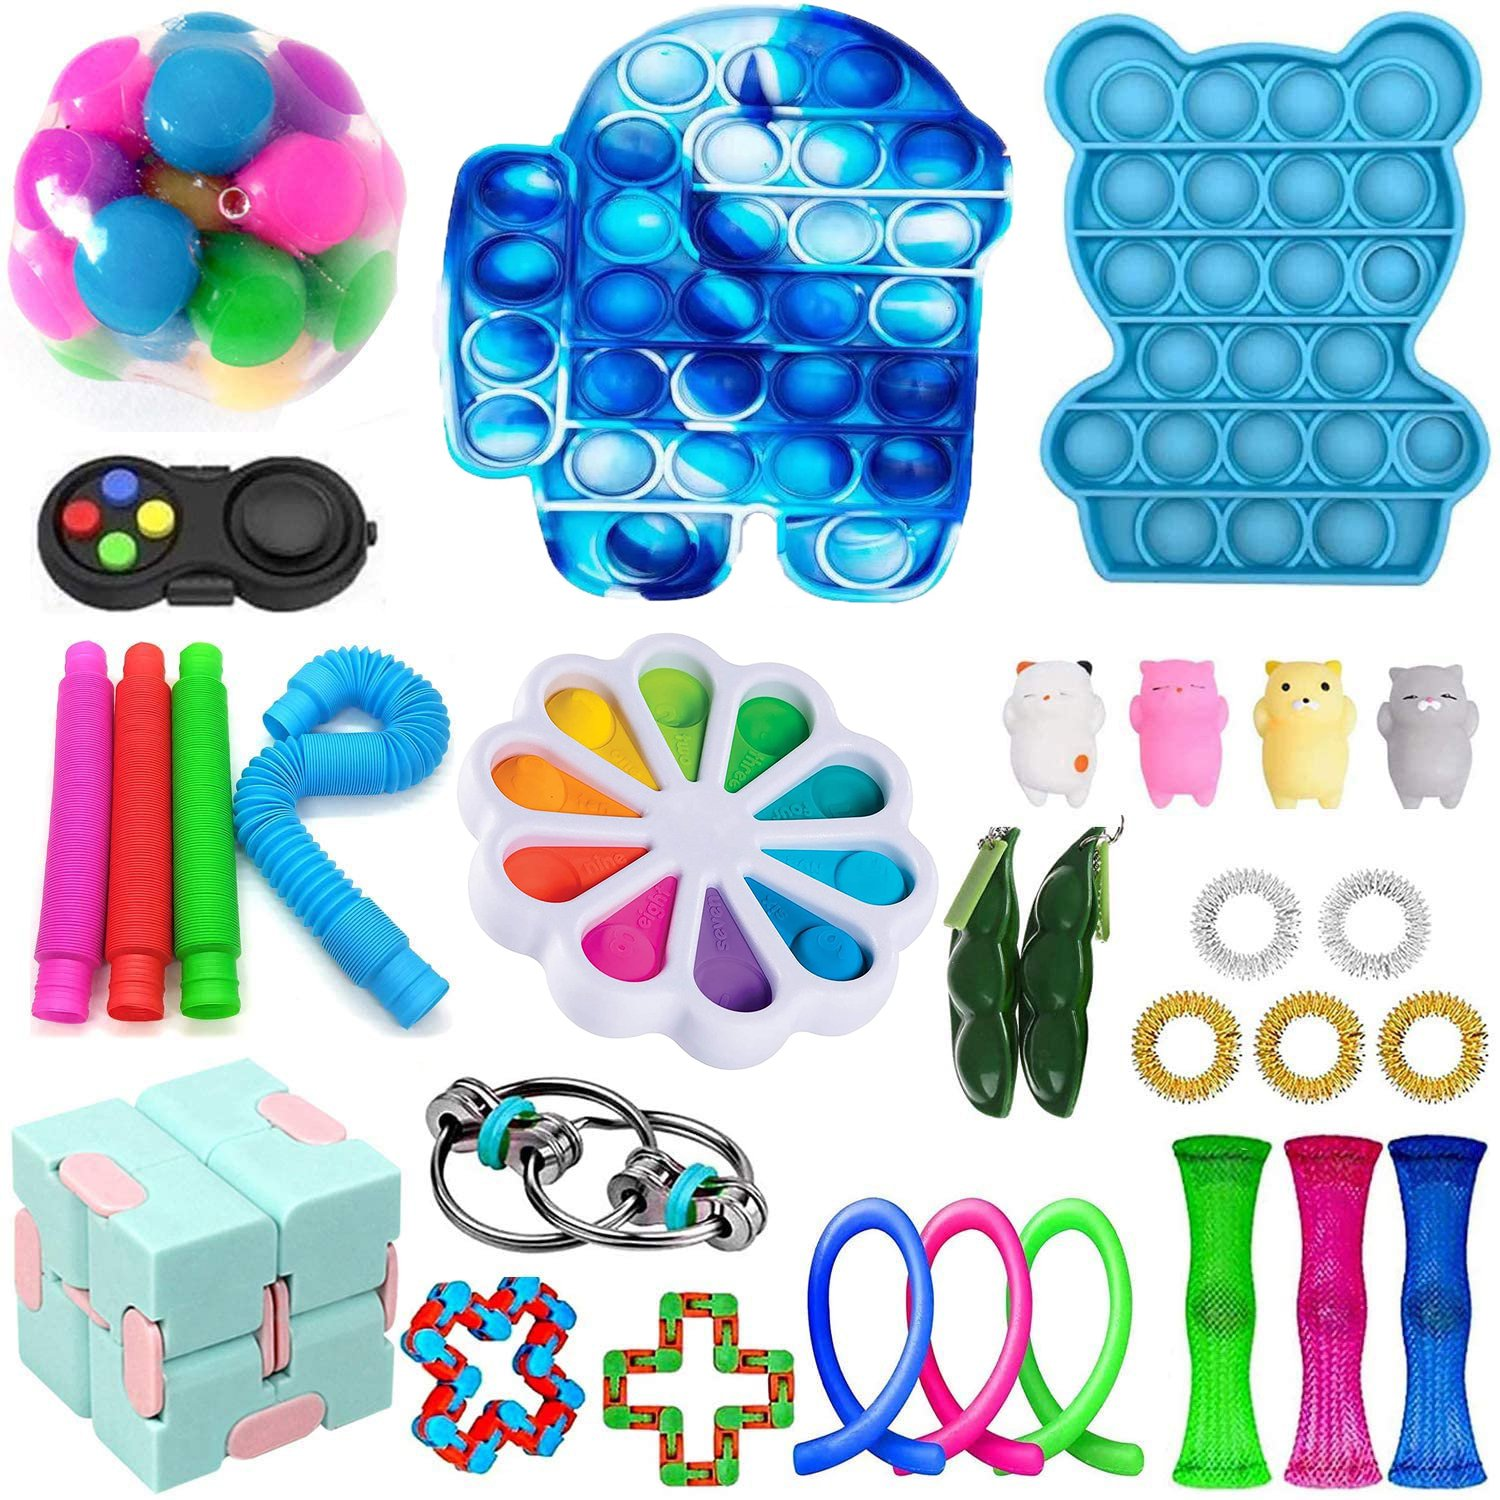 12 Pack Stress Anxiety Relief Toys,Fidget Toys for Kids Adults Best Office Gifts Kids Gifts 12 Pack MILESTAR Fidget Spinners pop Toys 